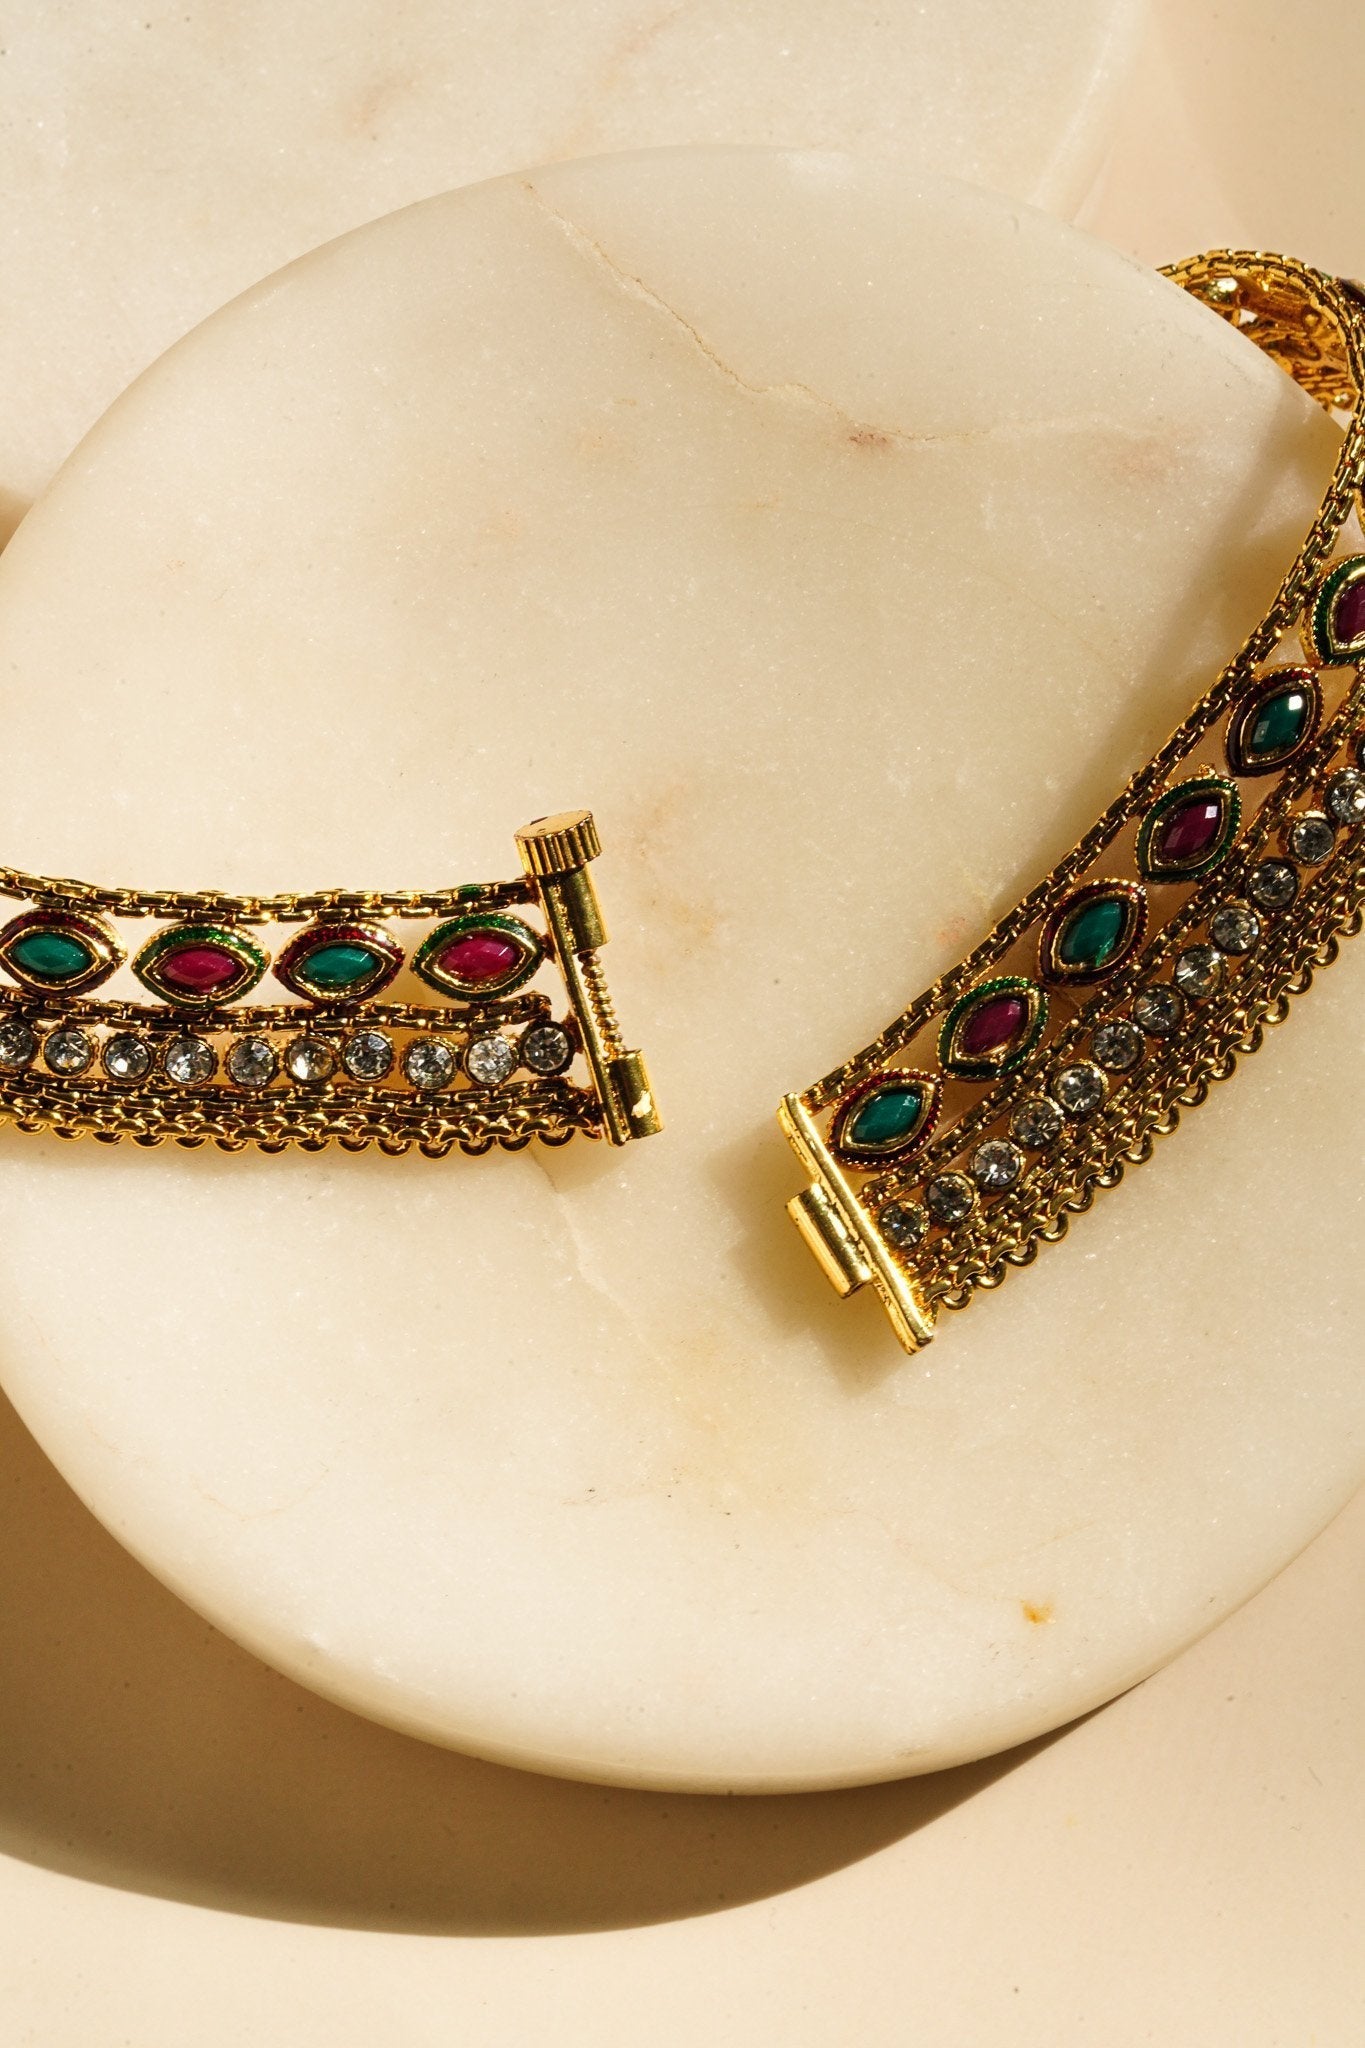 Nupur - Golden Kundan Anklets Anklets from Inaury